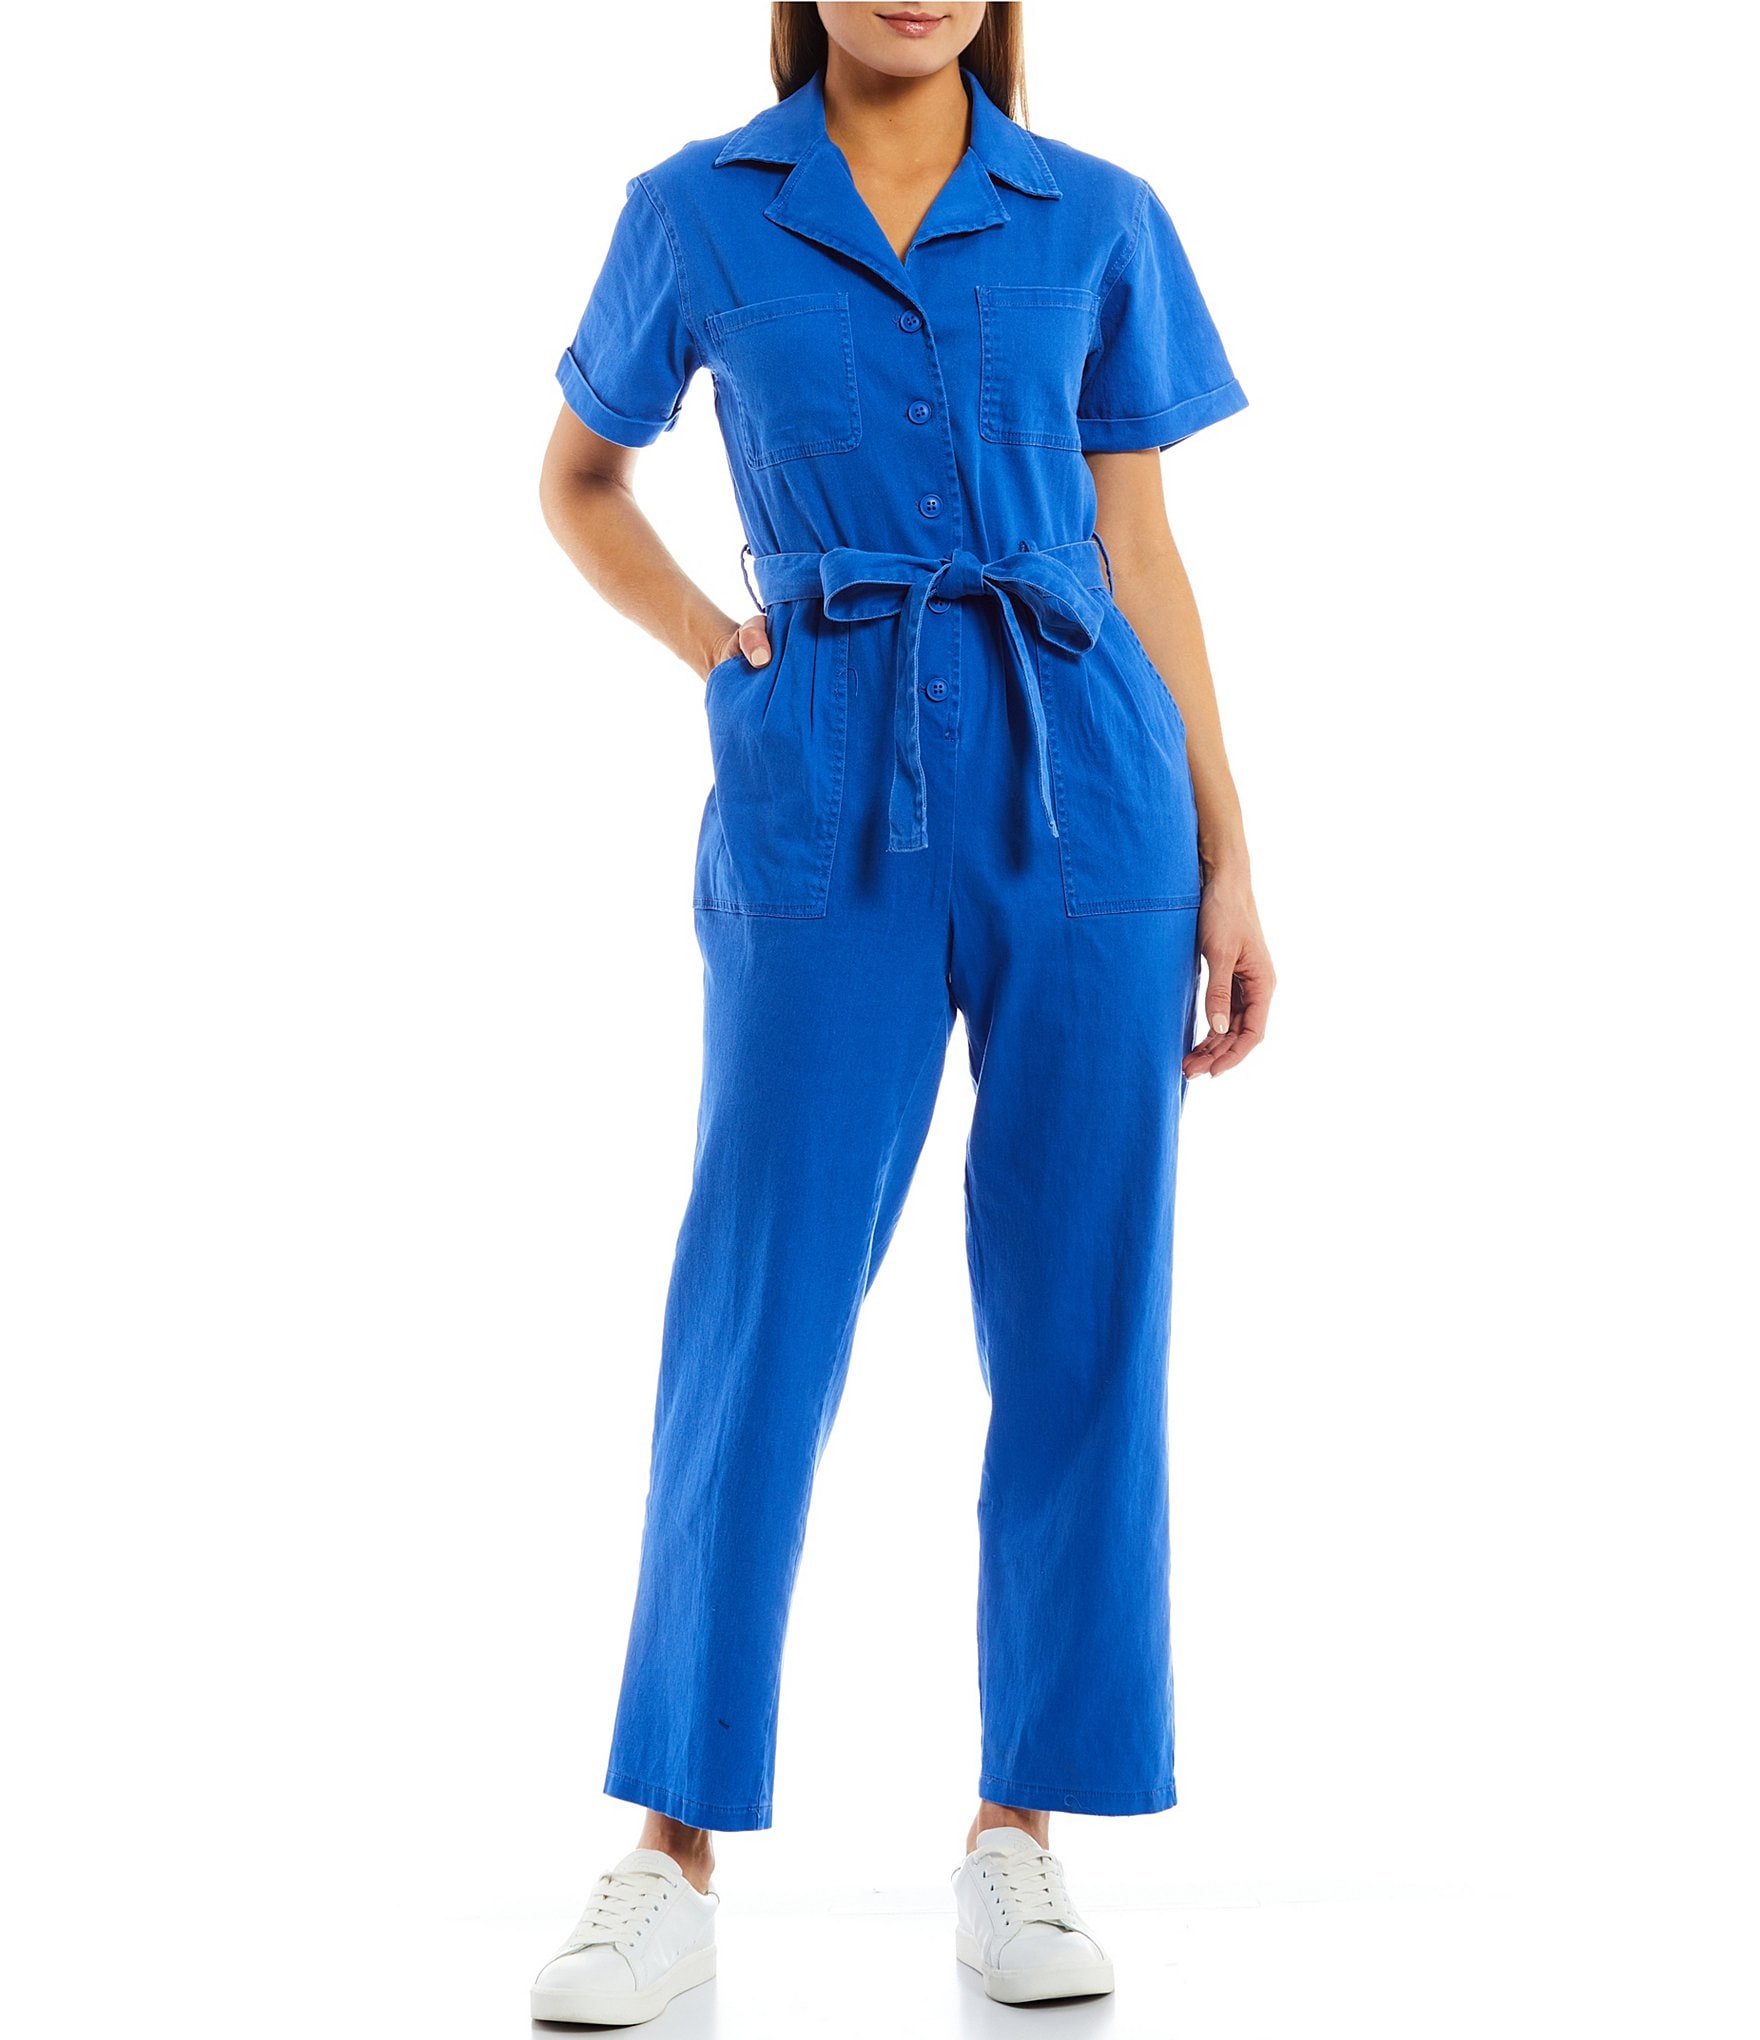 Fubotevic Womens Solid Color Short Sleeve Casual Crewneck Belted Jumpsuit Romper 